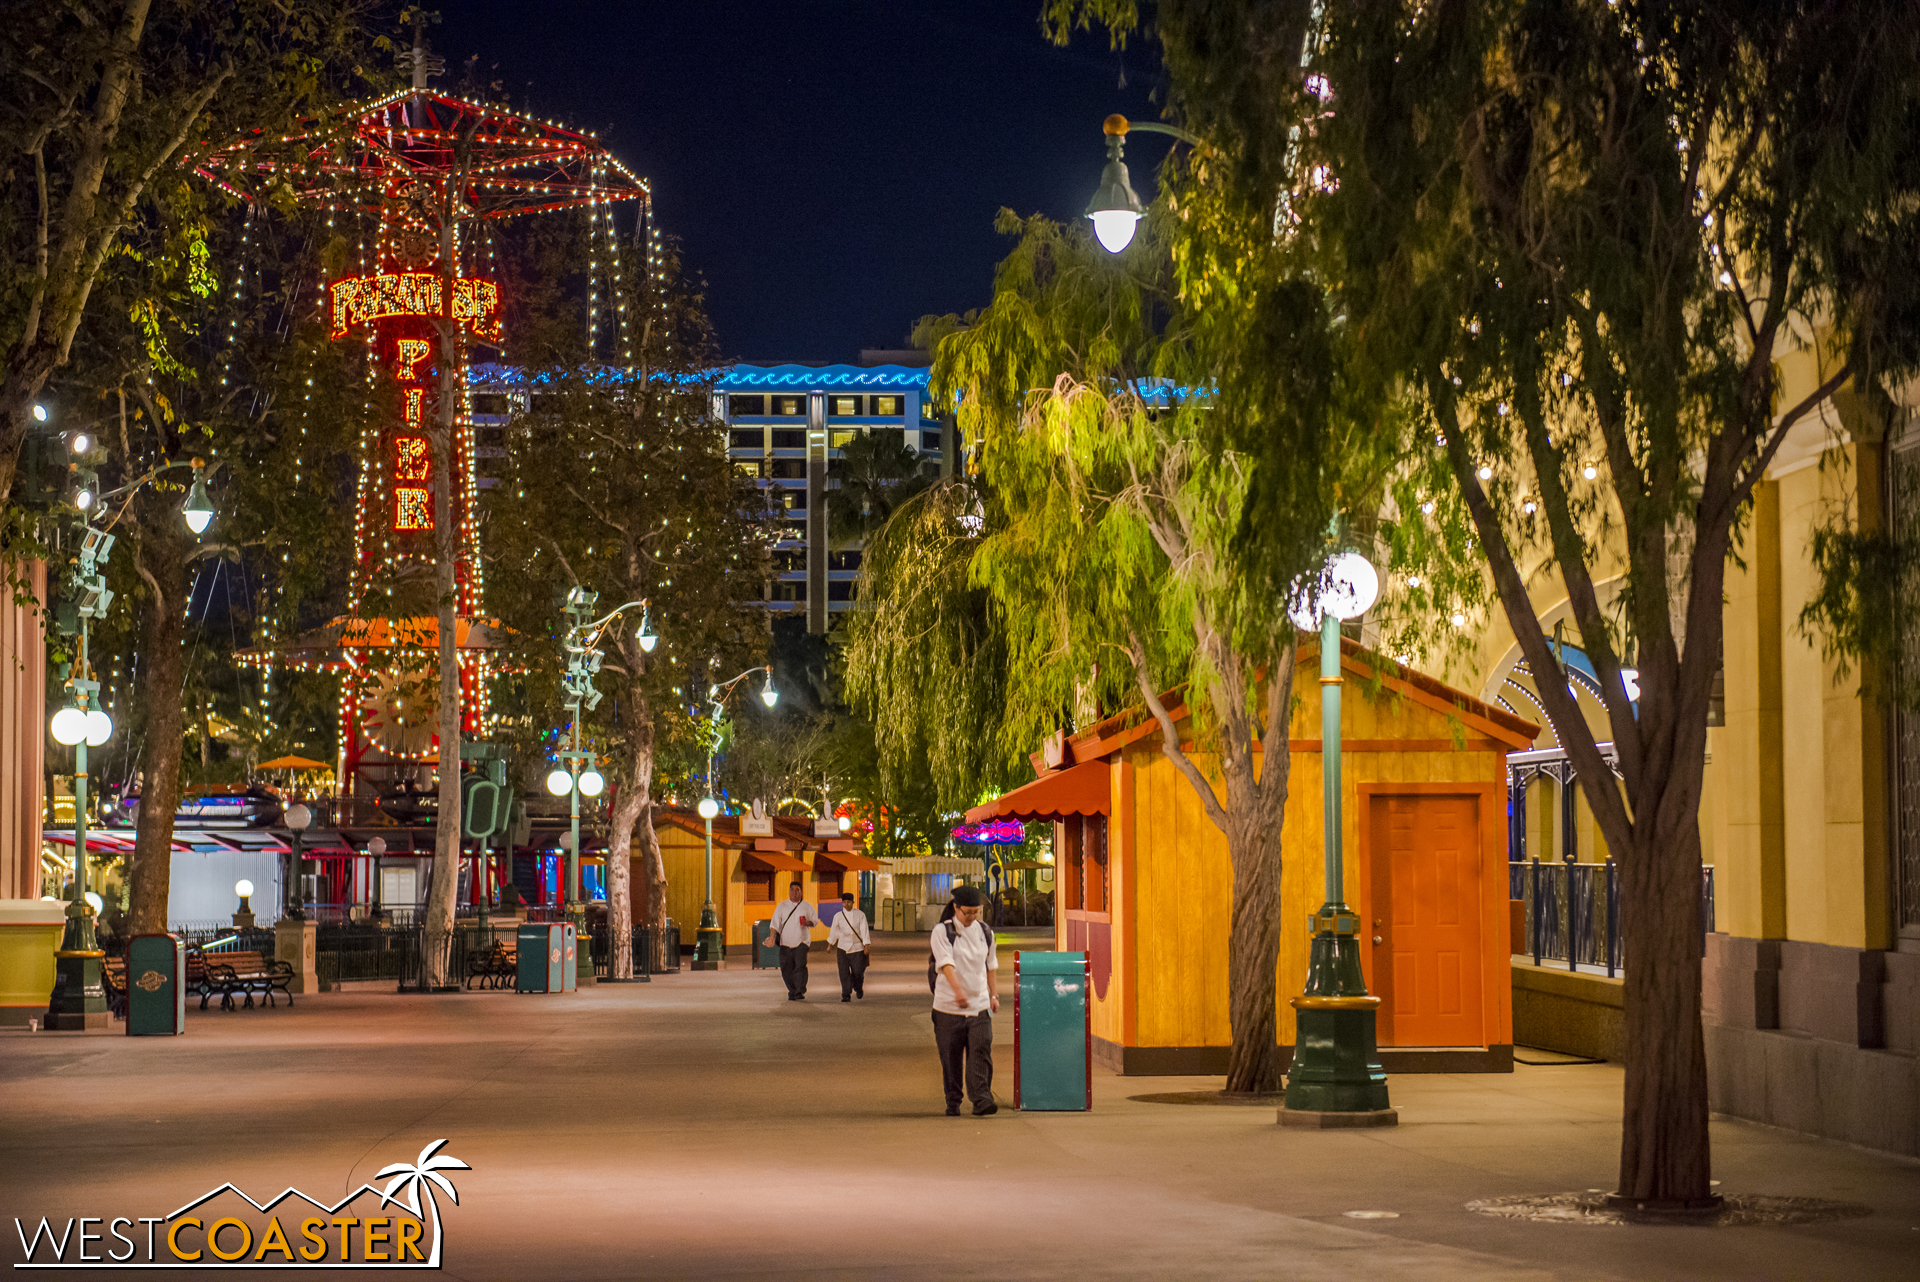  Speaking of food, next Friday marks the return of the Food and Wine Festival to Disney California Adventure. 